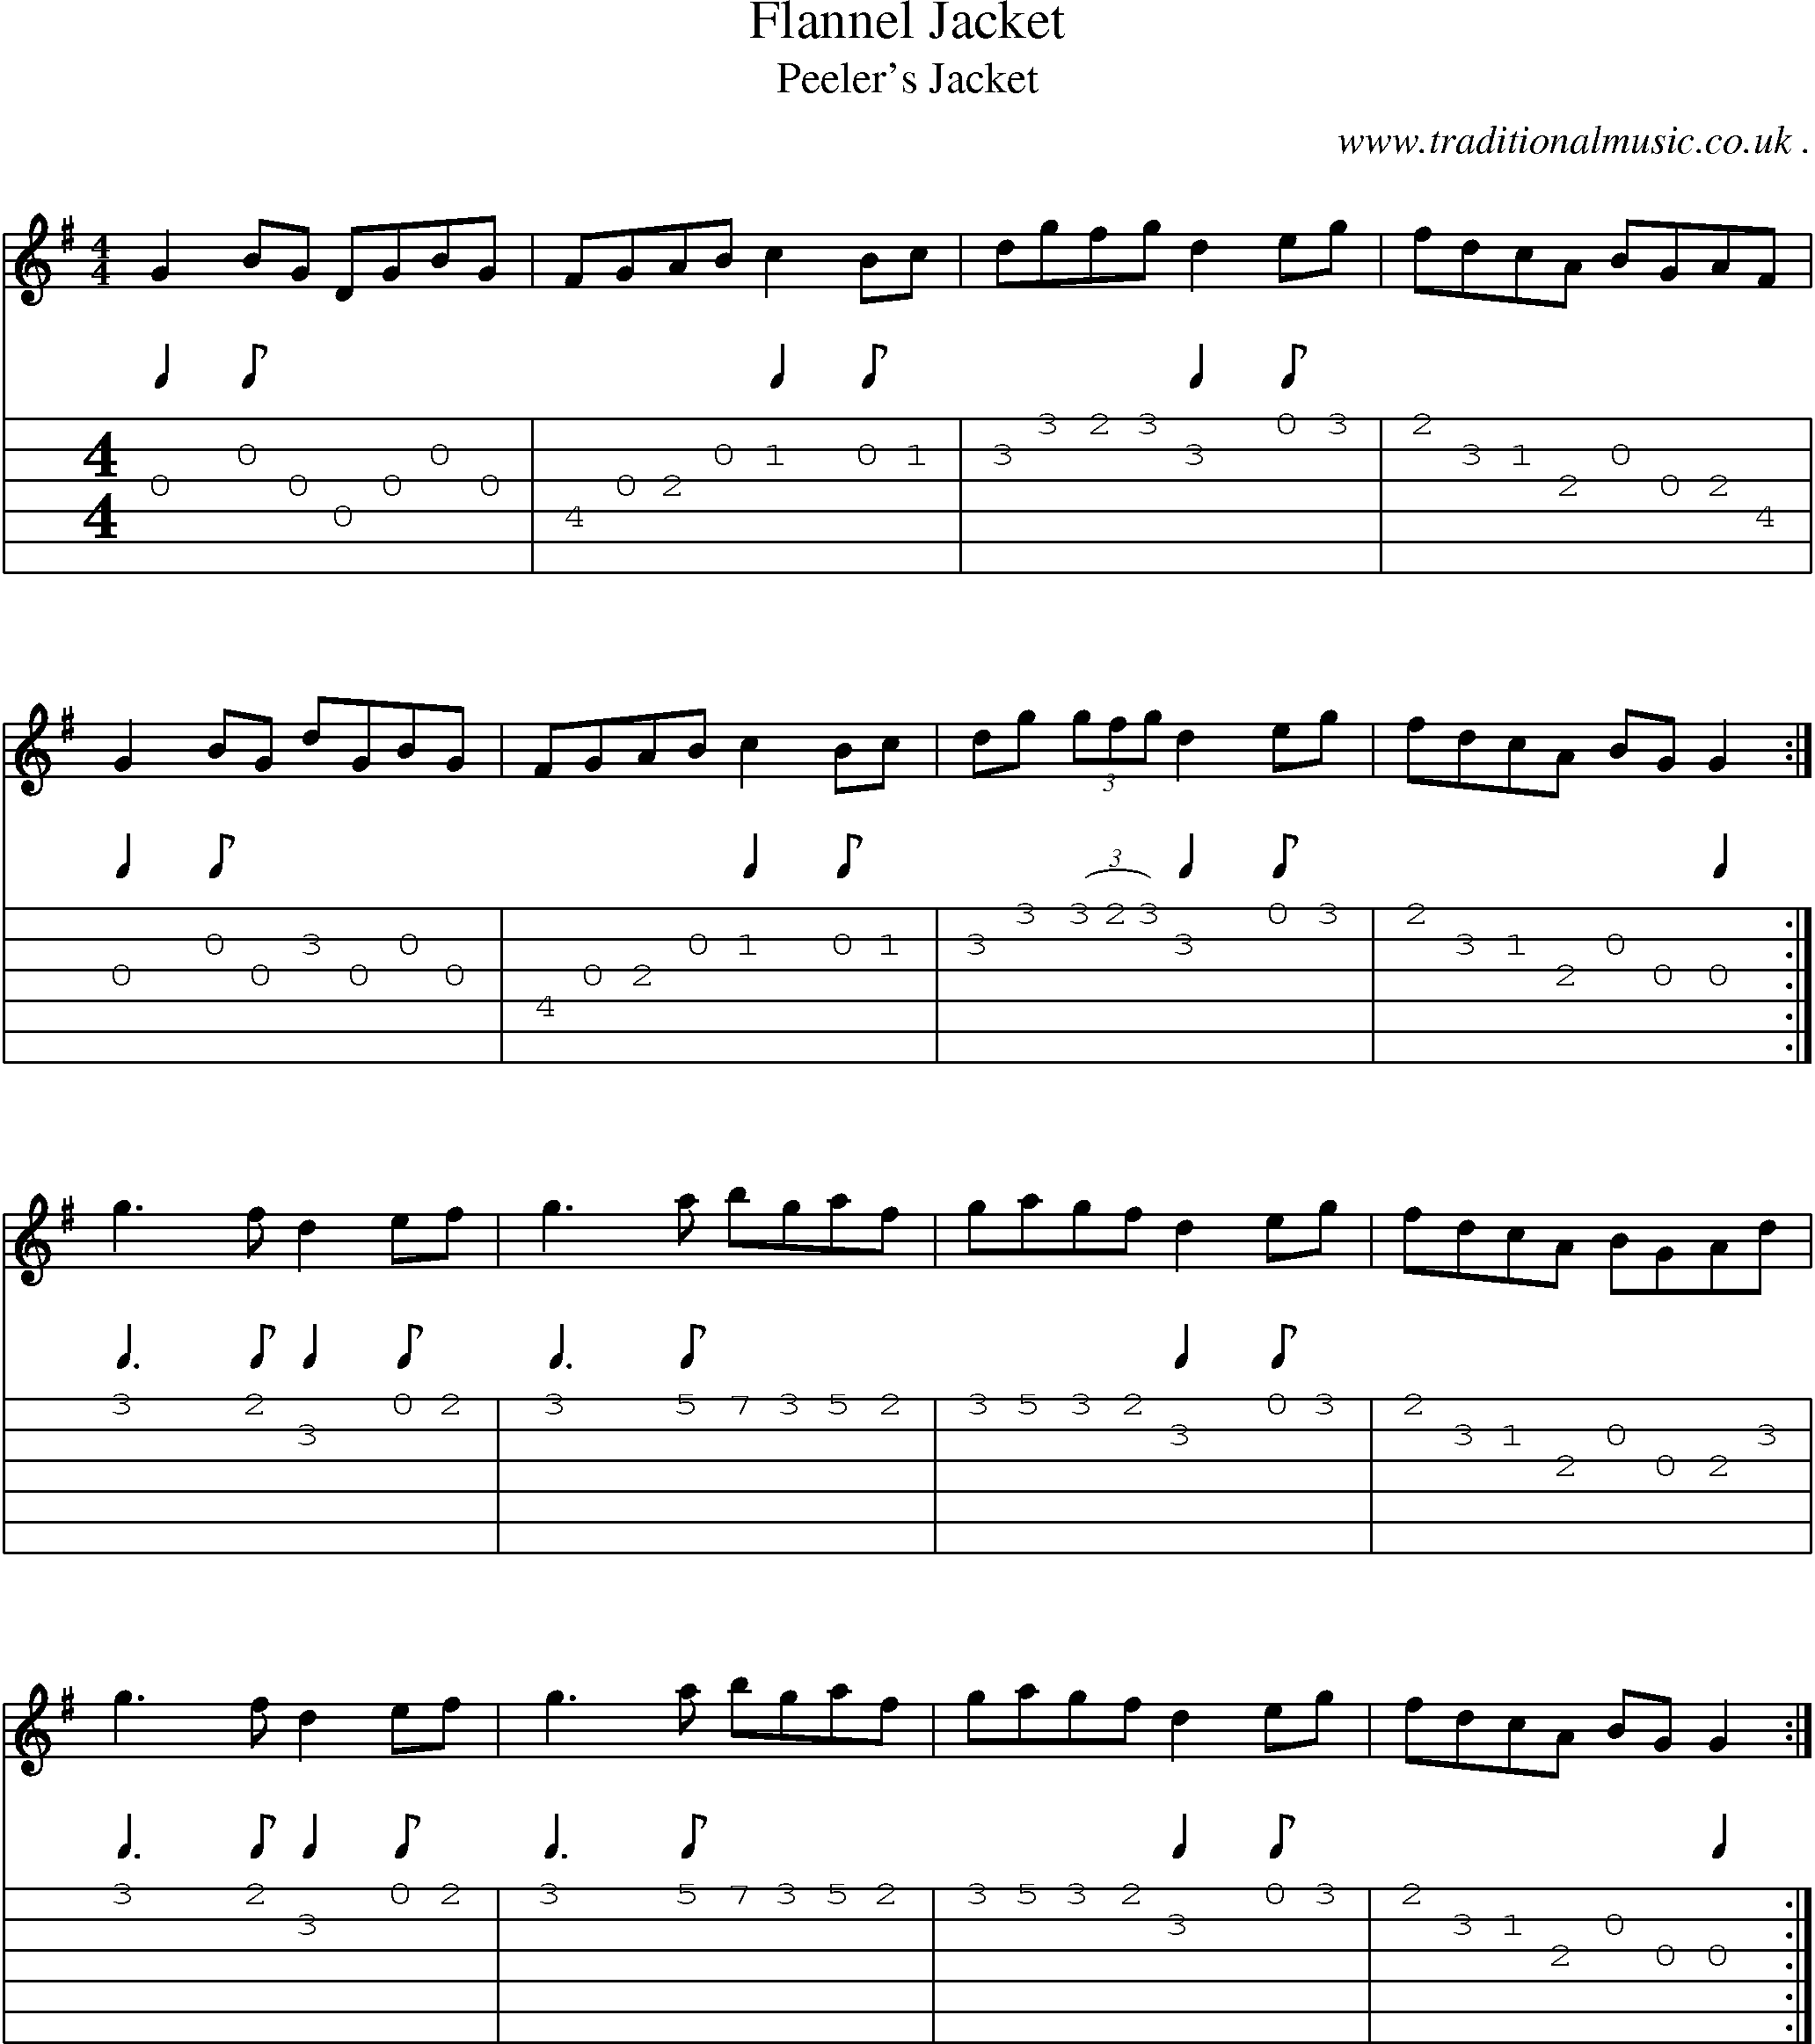 Sheet-Music and Guitar Tabs for Flannel Jacket